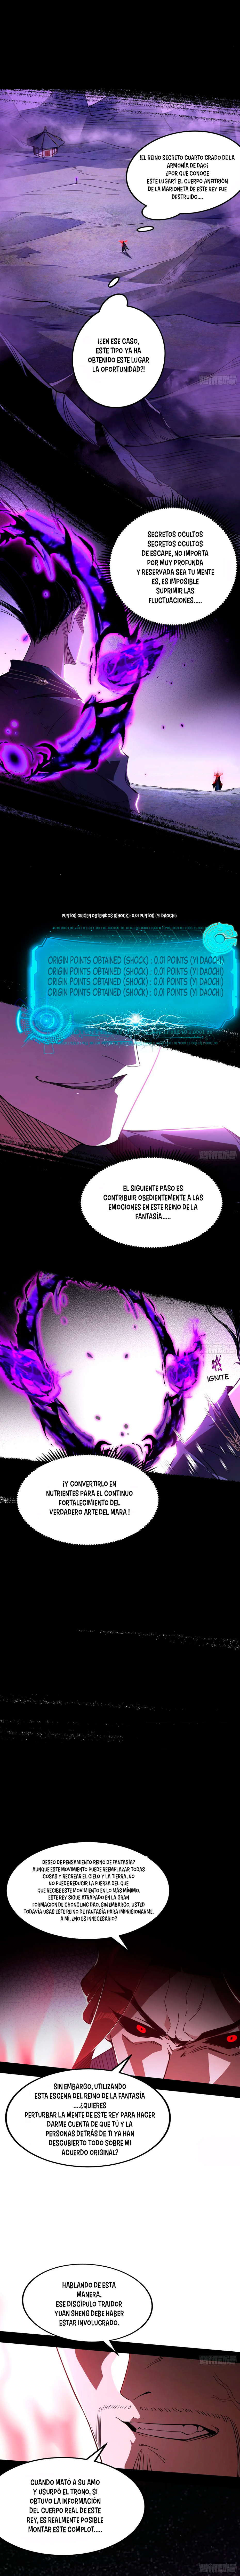 Manga Soy un dios maligno Chapter 308 image number 5